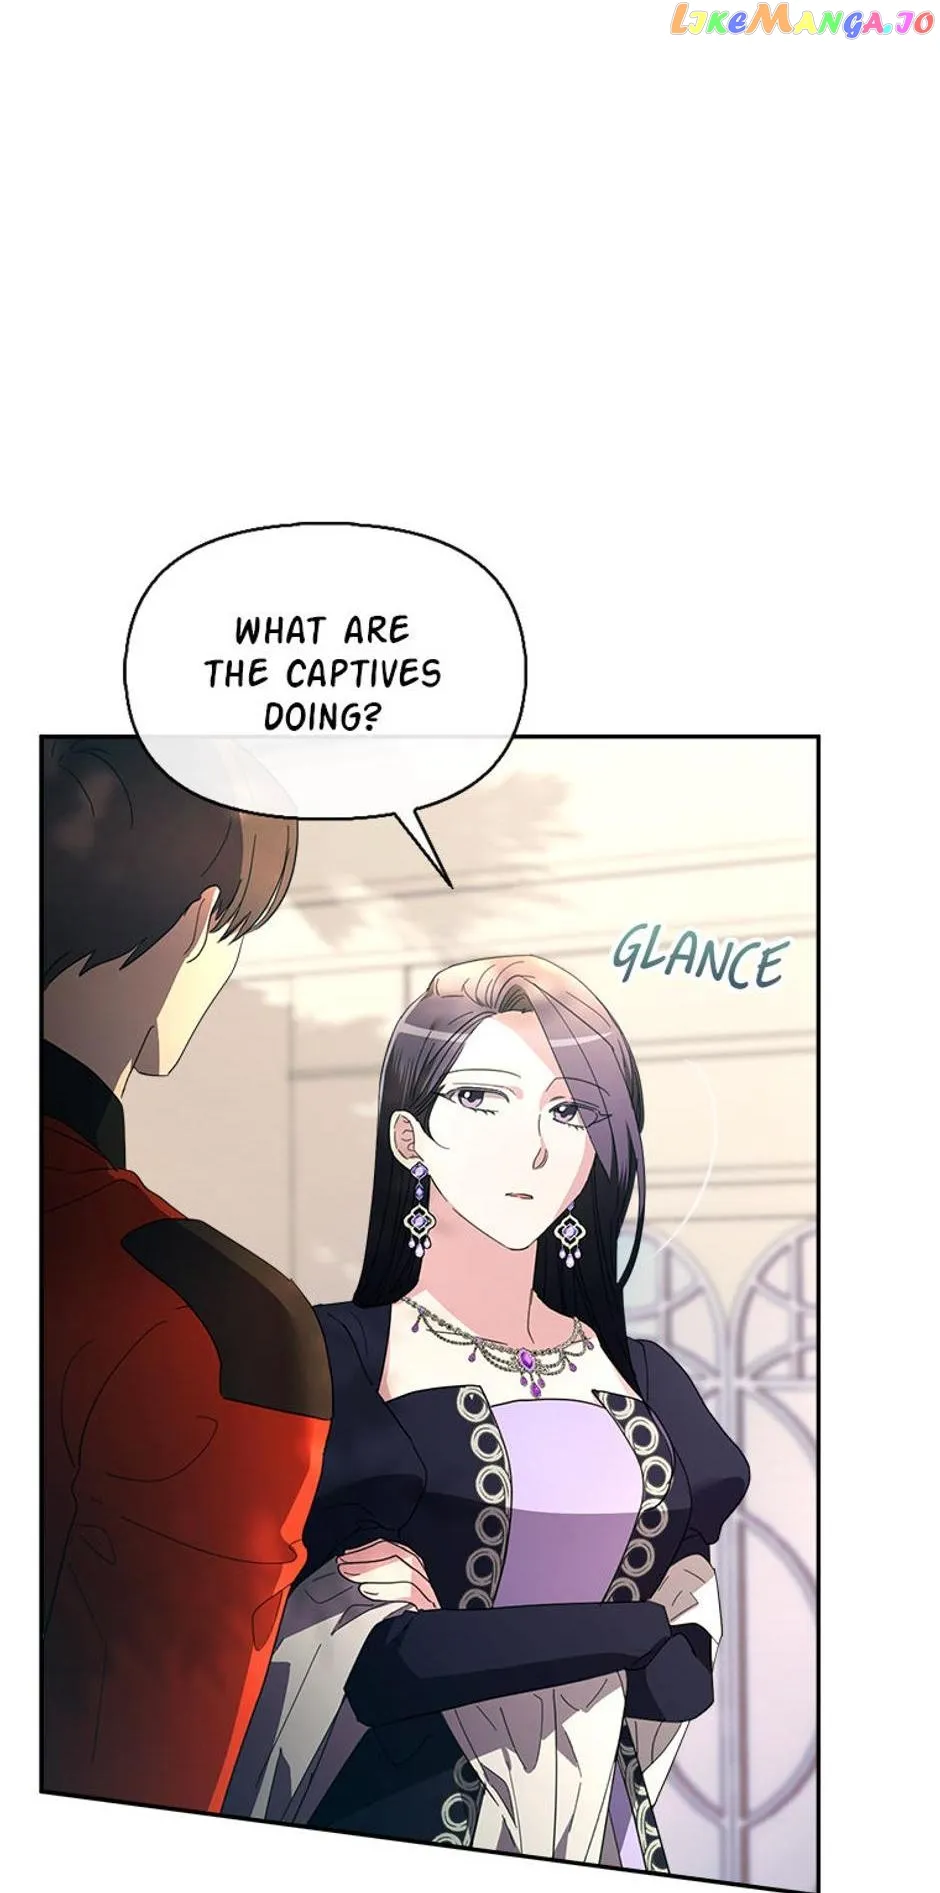 The Villainess Debuts Gorgeously chapter 28